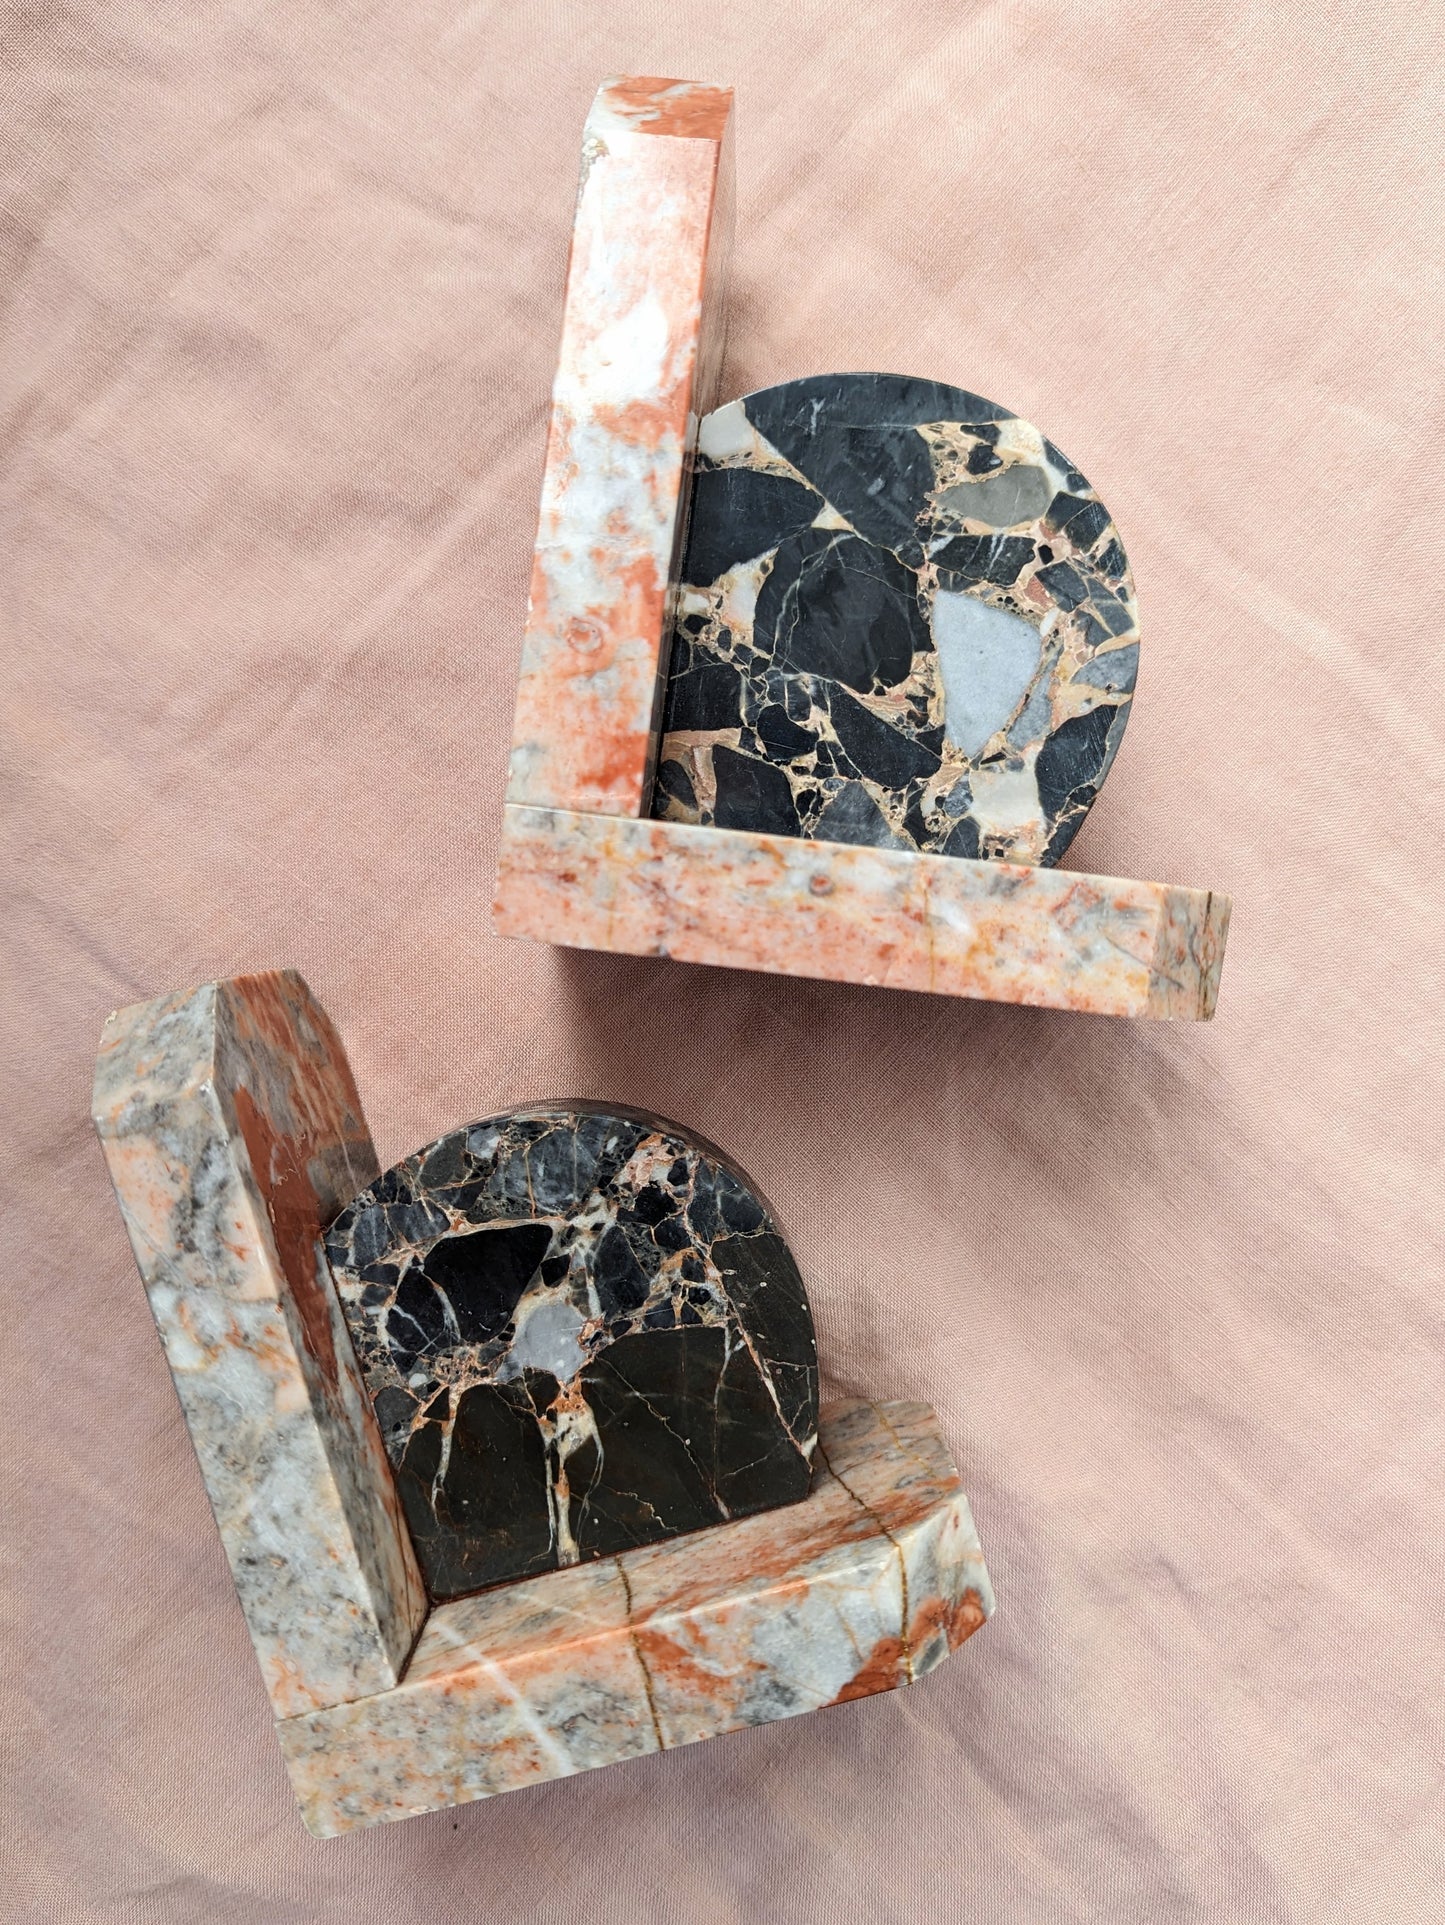 French Marble Bookends